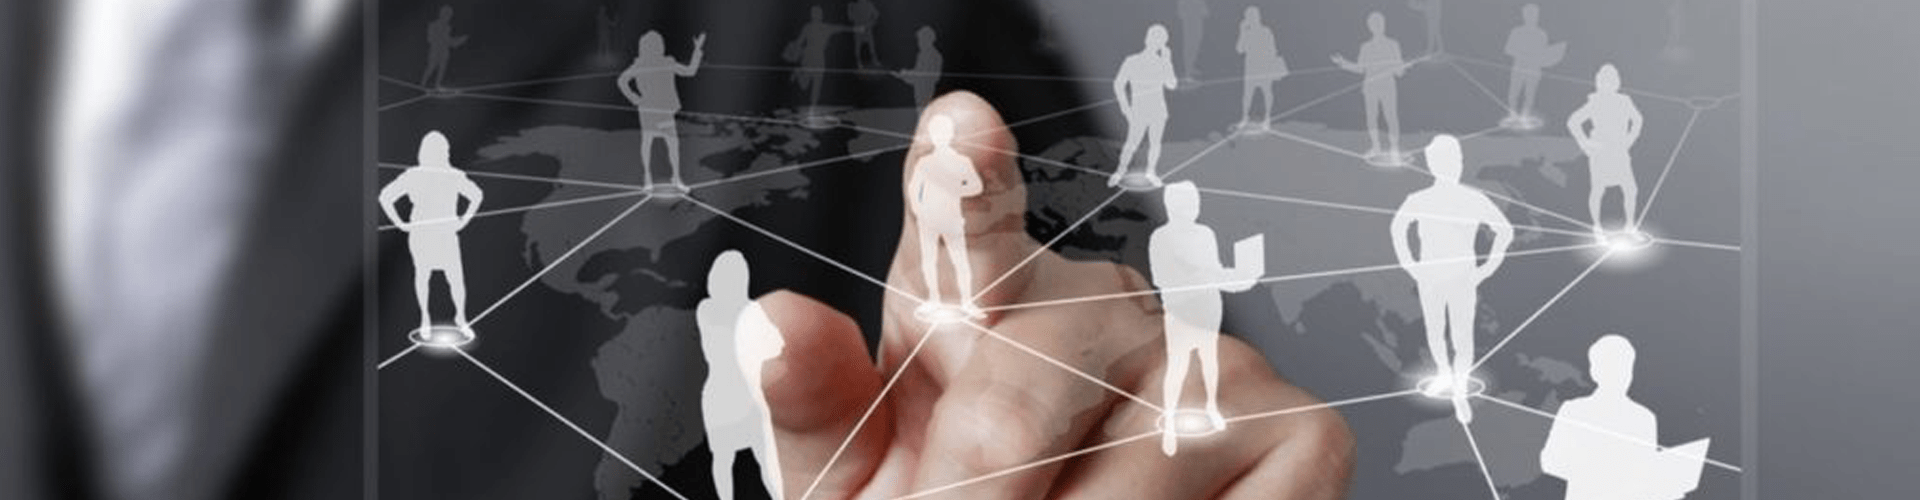 Businessman pointing at the center of a display showing people connecting with each other